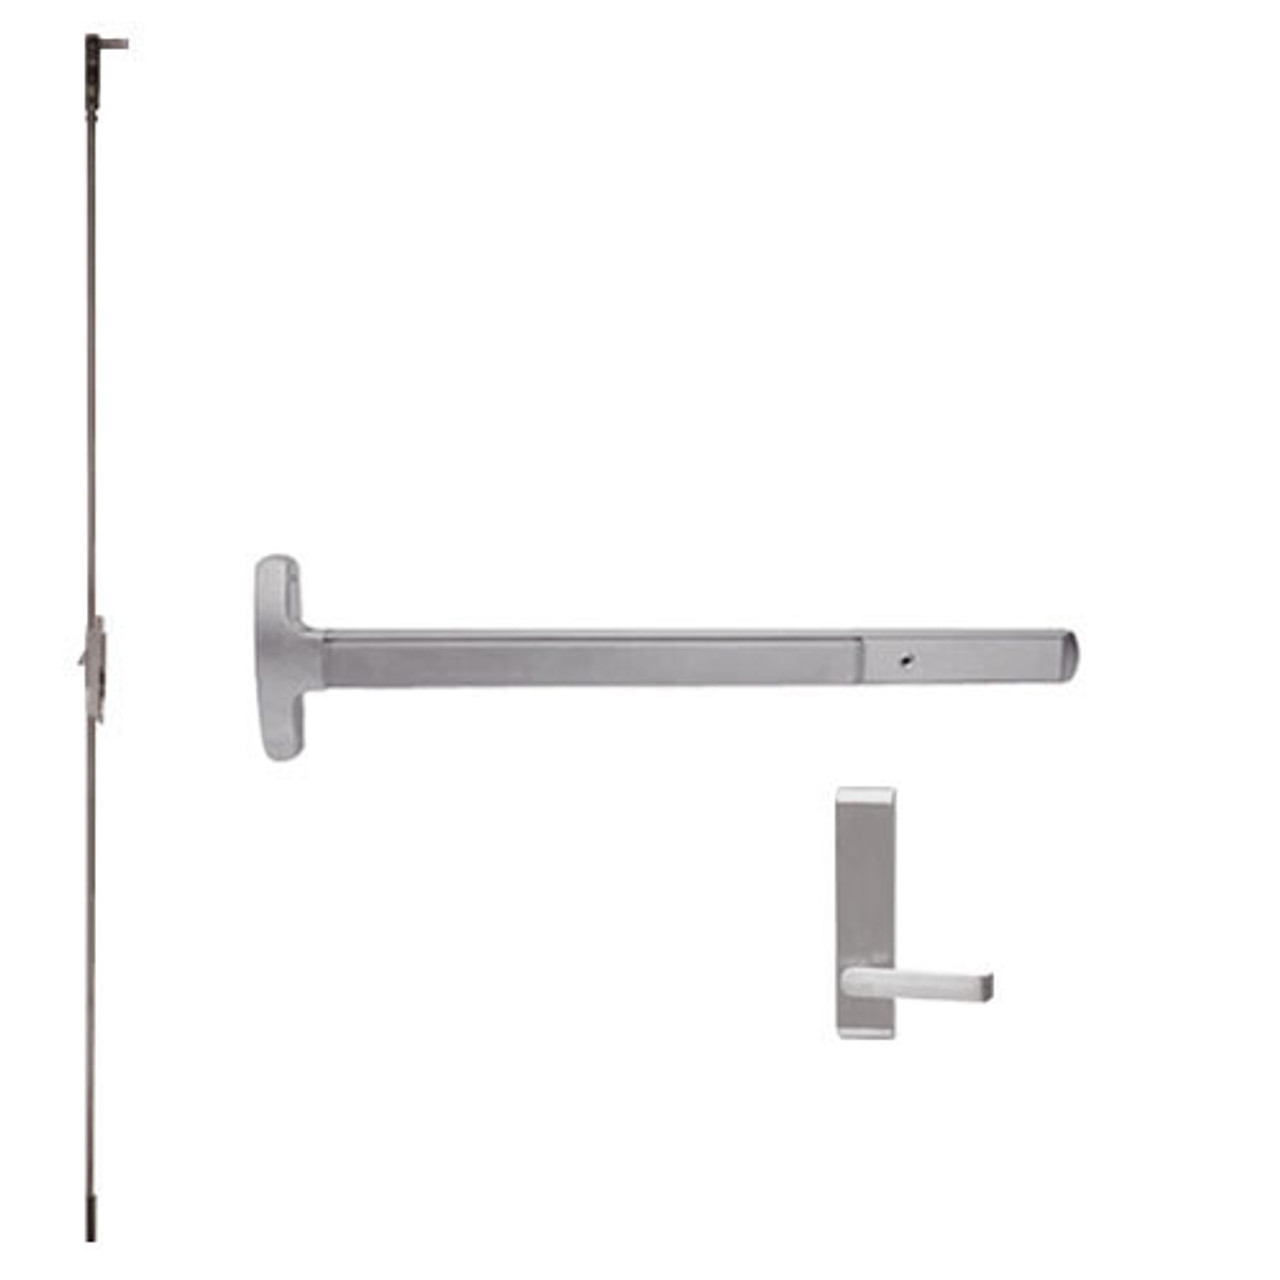 24-C-L-DT-DANE-US32D-3-RHR Falcon Exit Device in Satin Stainless Steel